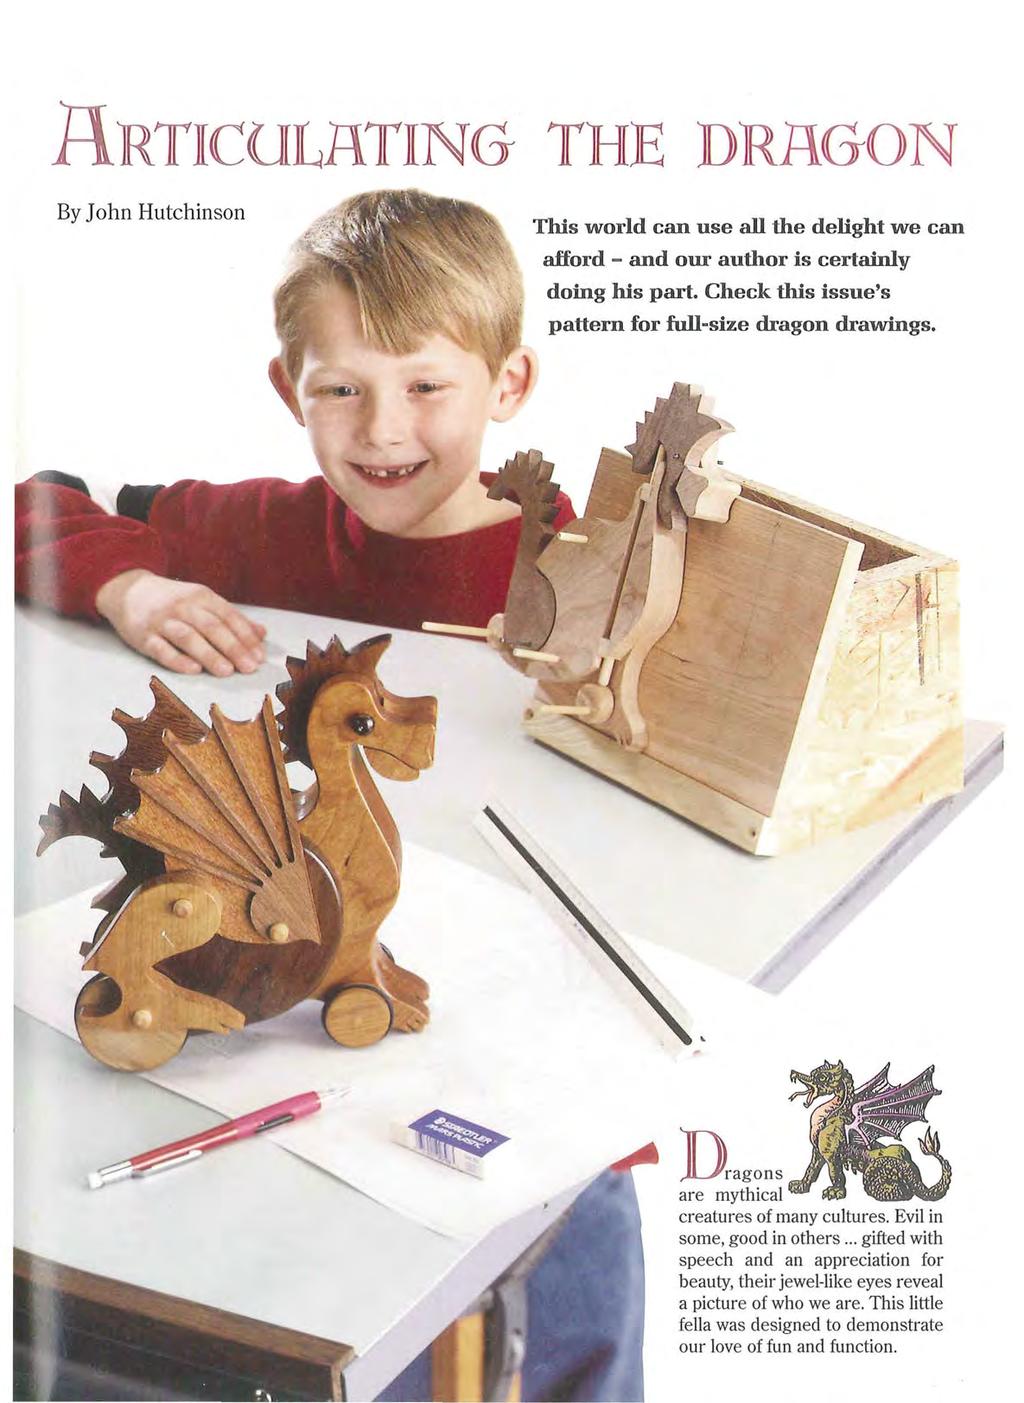 ARTICULATING THE DRAGON By John Hutchinson This world can use all the delight we can afford - and our author is certainly doing his part. Check this issue's pattern for full-size dragon drawings.